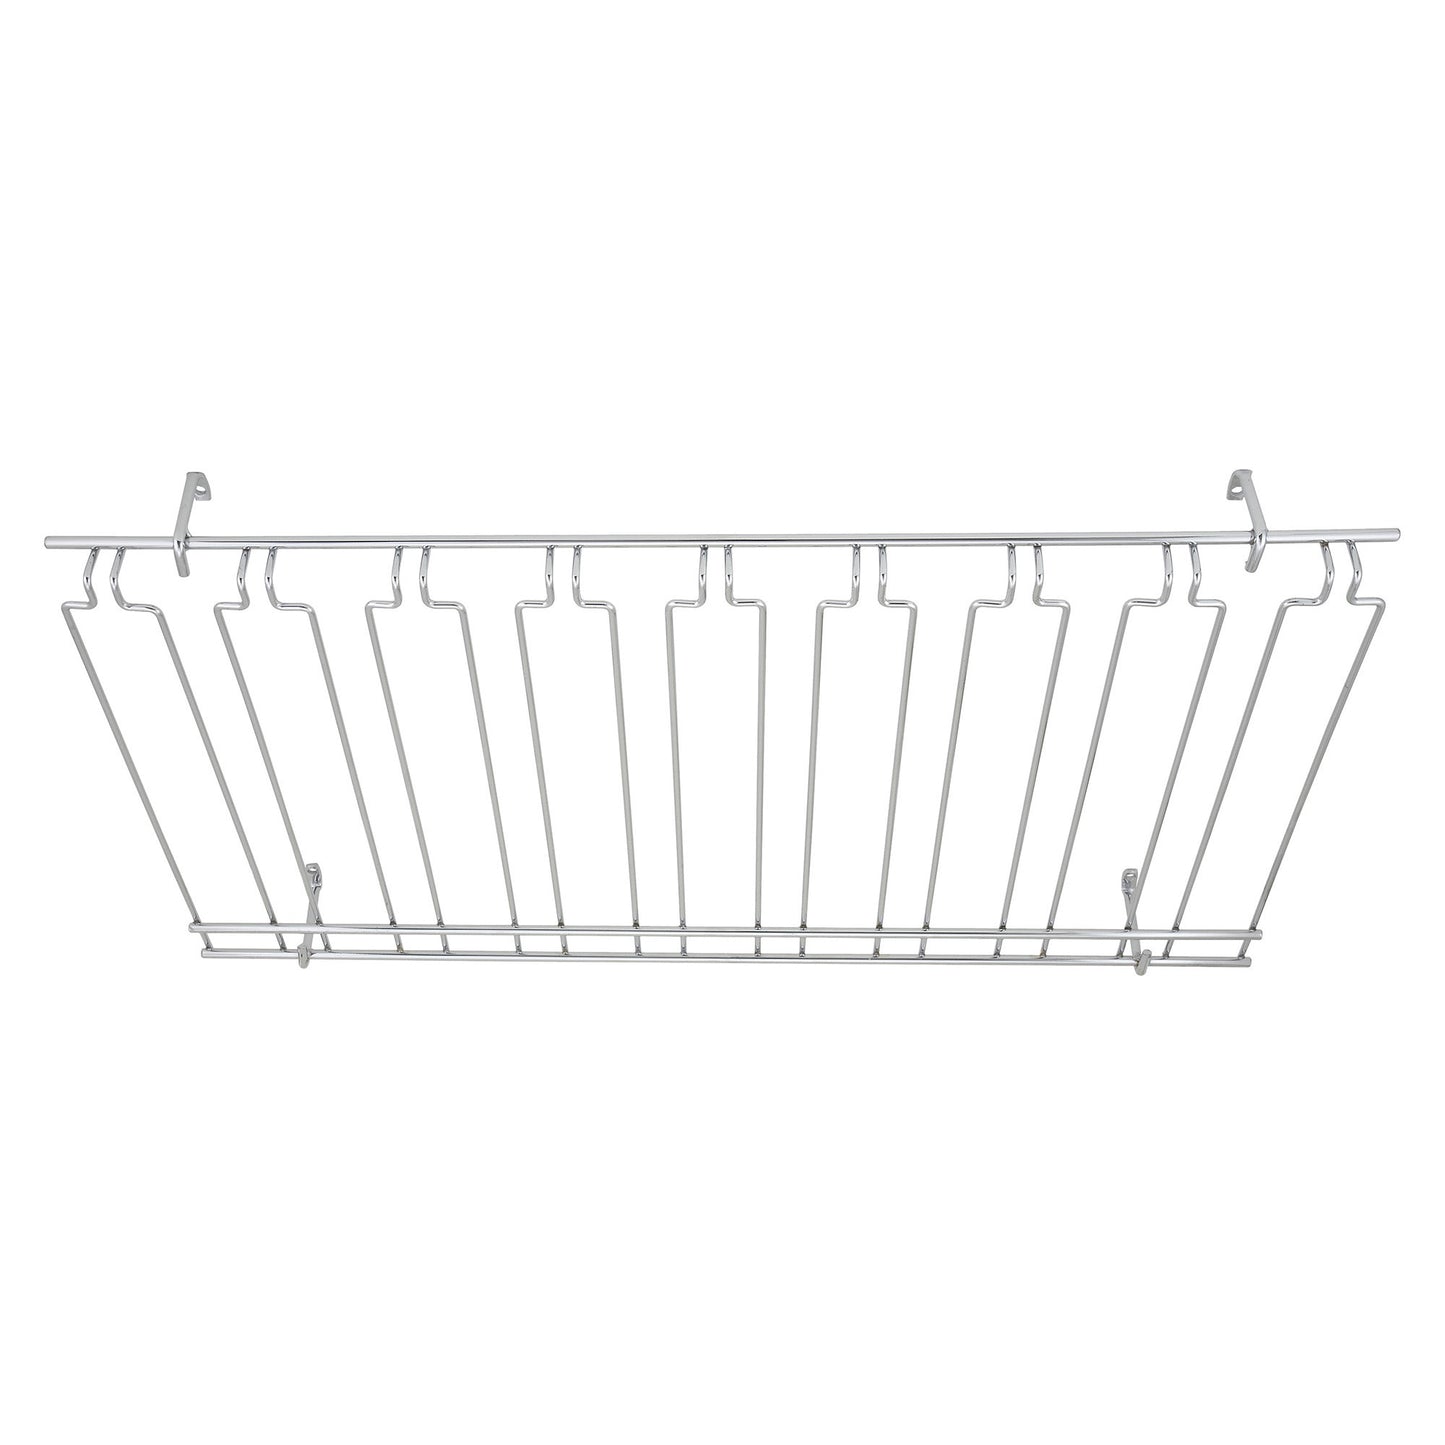 GHC-1836 - 8 Channel Overhead Glass Hanger